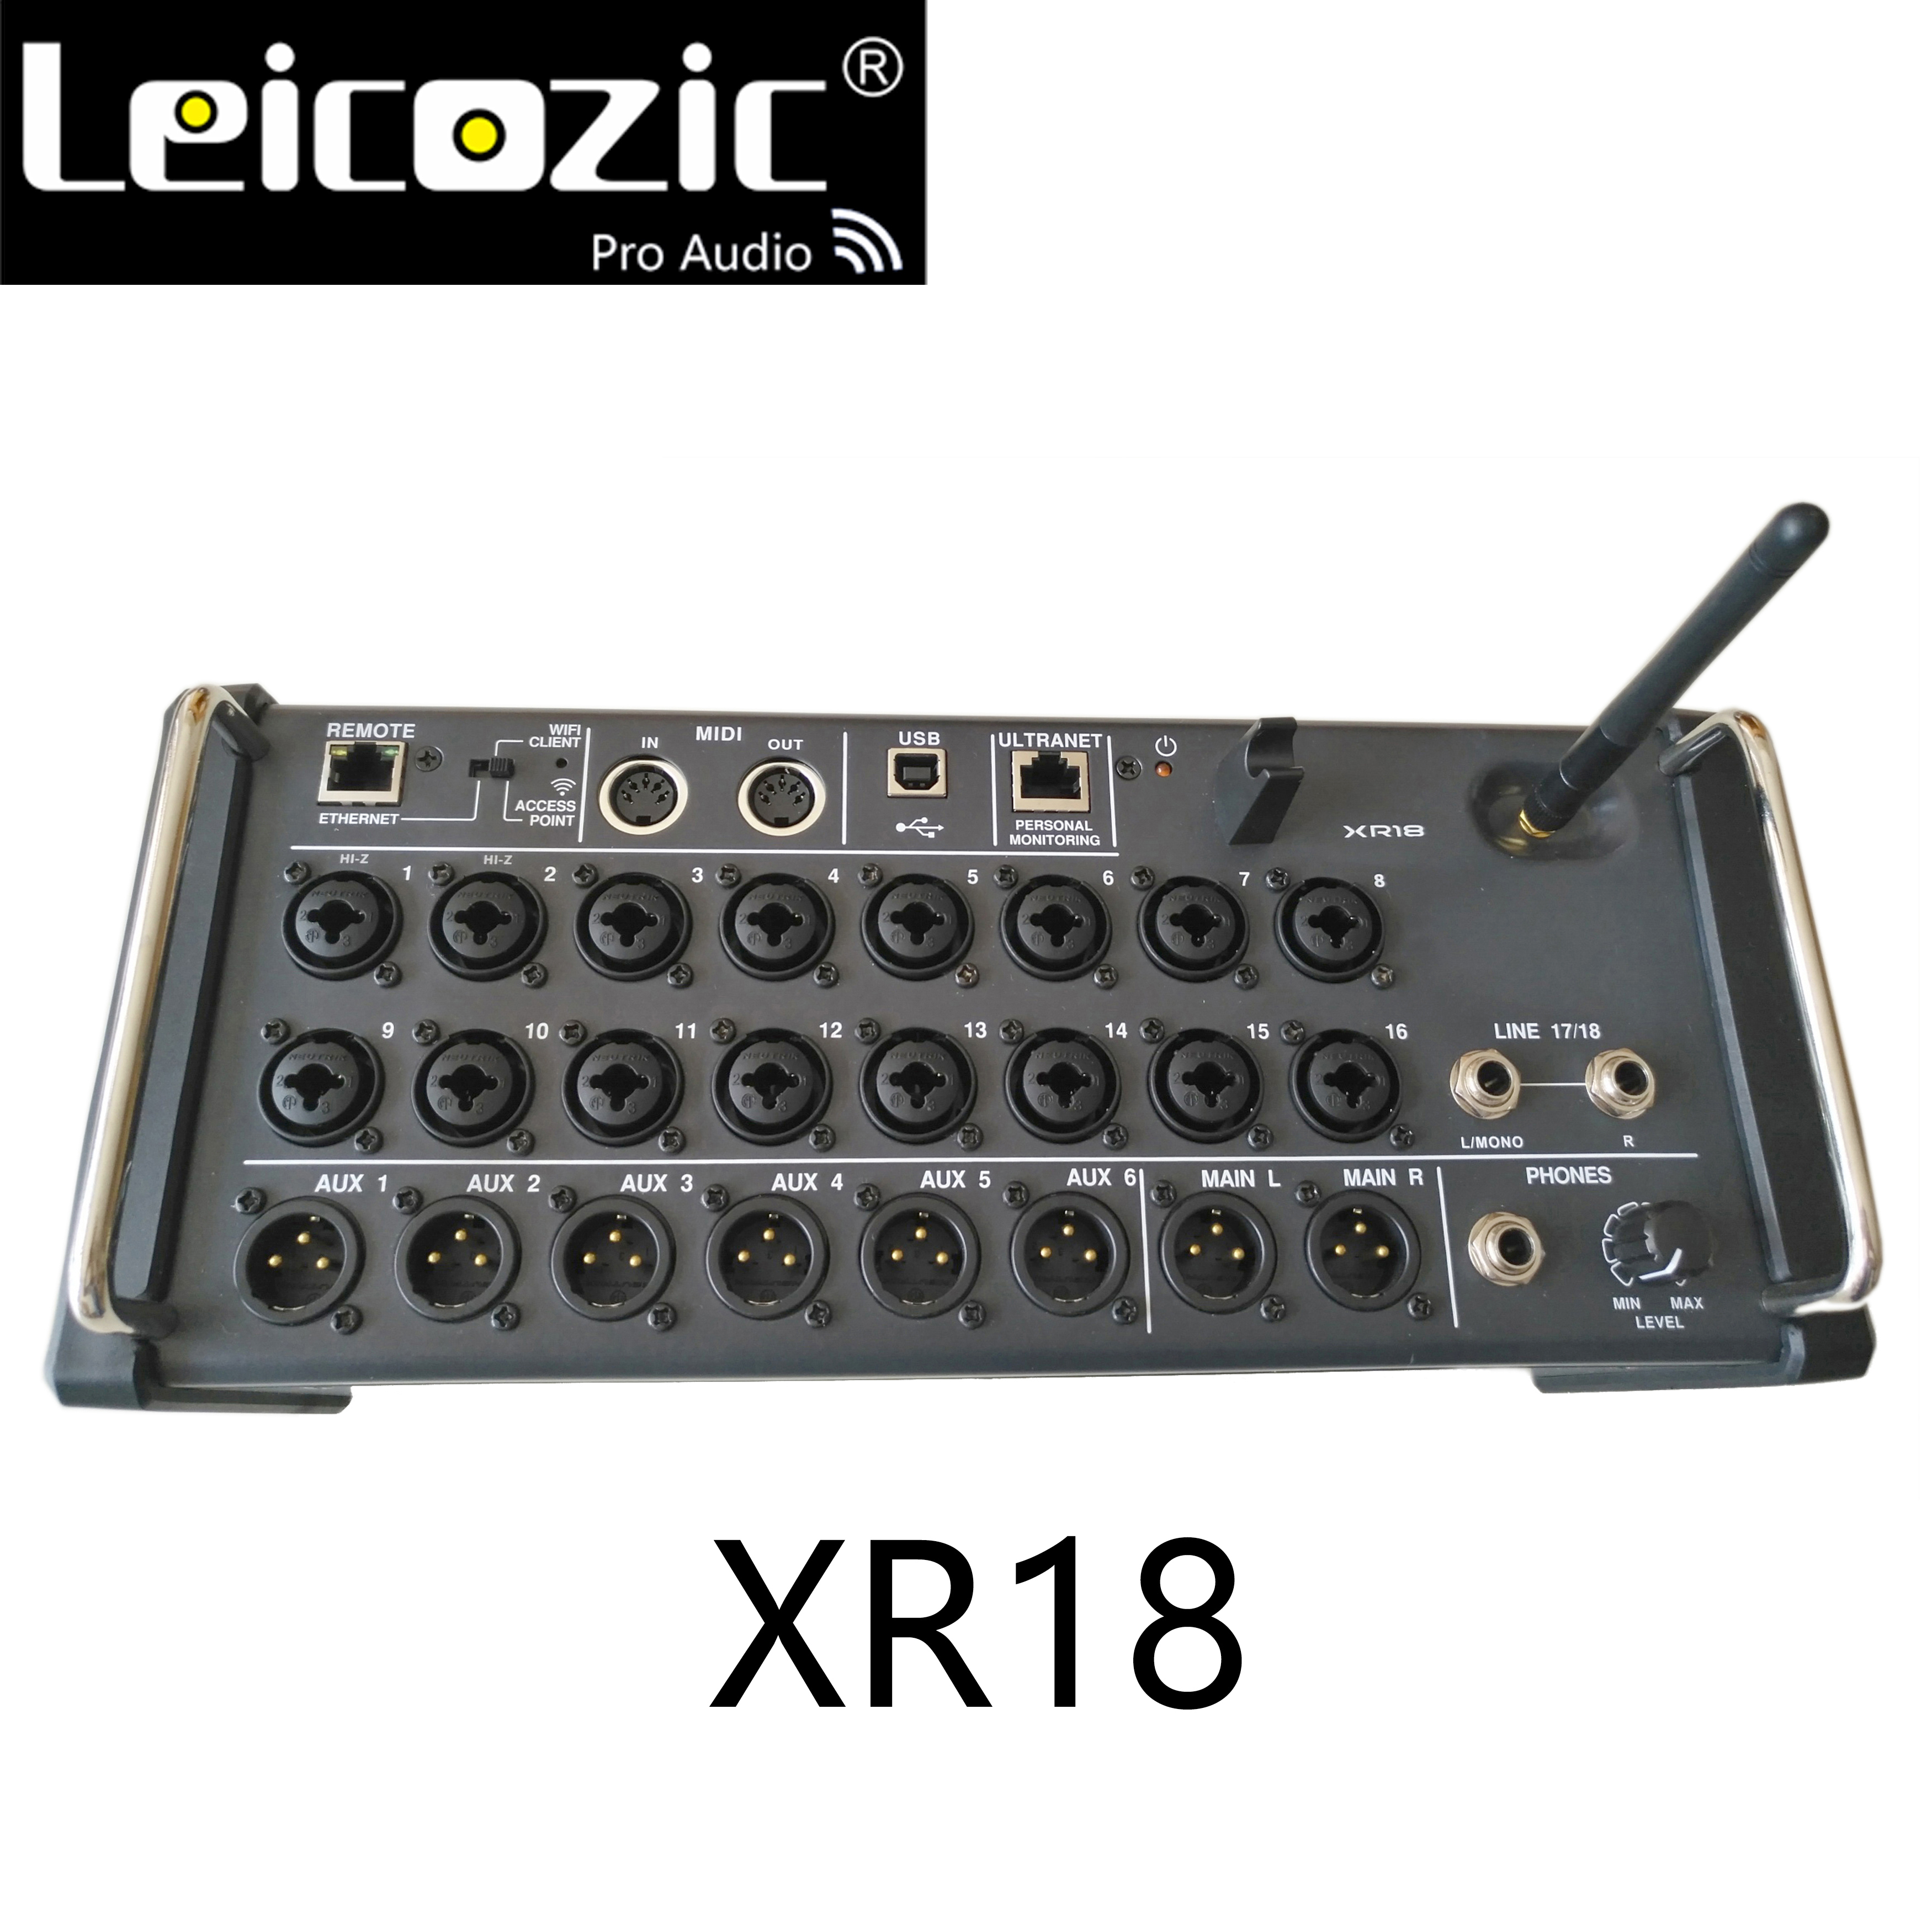 Leicozic X AIR XR18 18-Ch 12-Bus Digital Mixer for iPad/Android Tablet Built in Wi-Fi / USB Suited For Stage/Live Sound/Studio - history & Review | AliExpress Seller - Leicozic Official Store